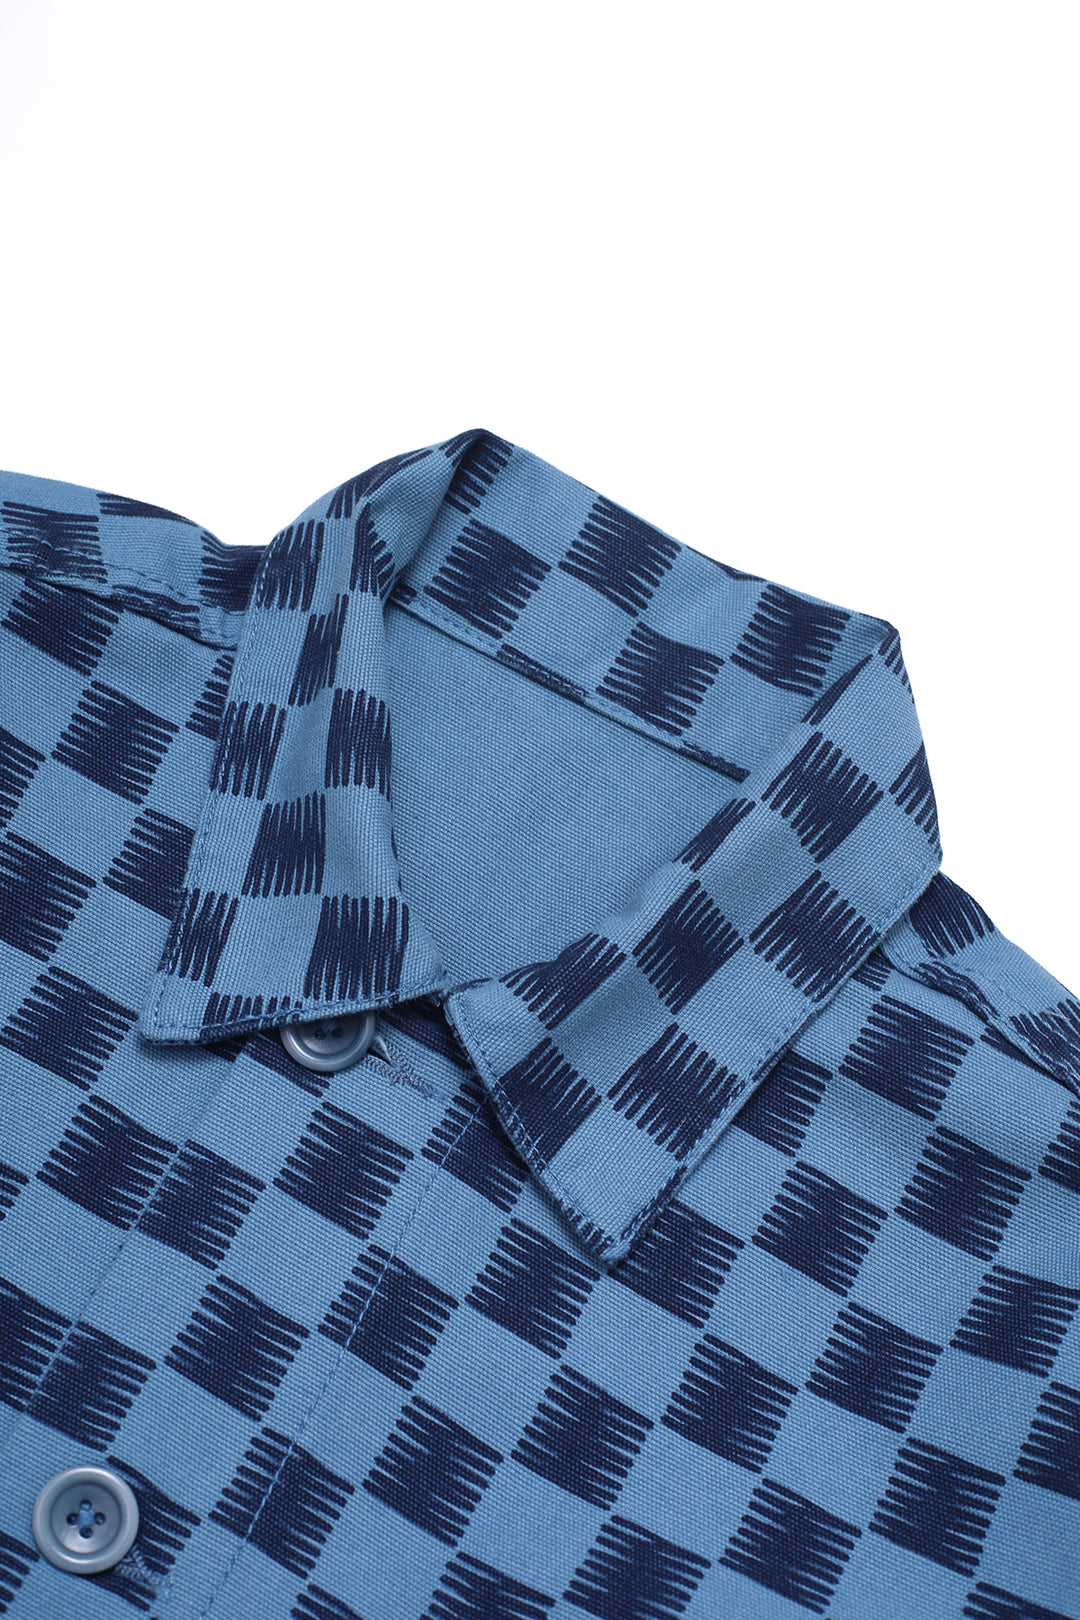 Service Works - Coverall Jacket - Blue Checker